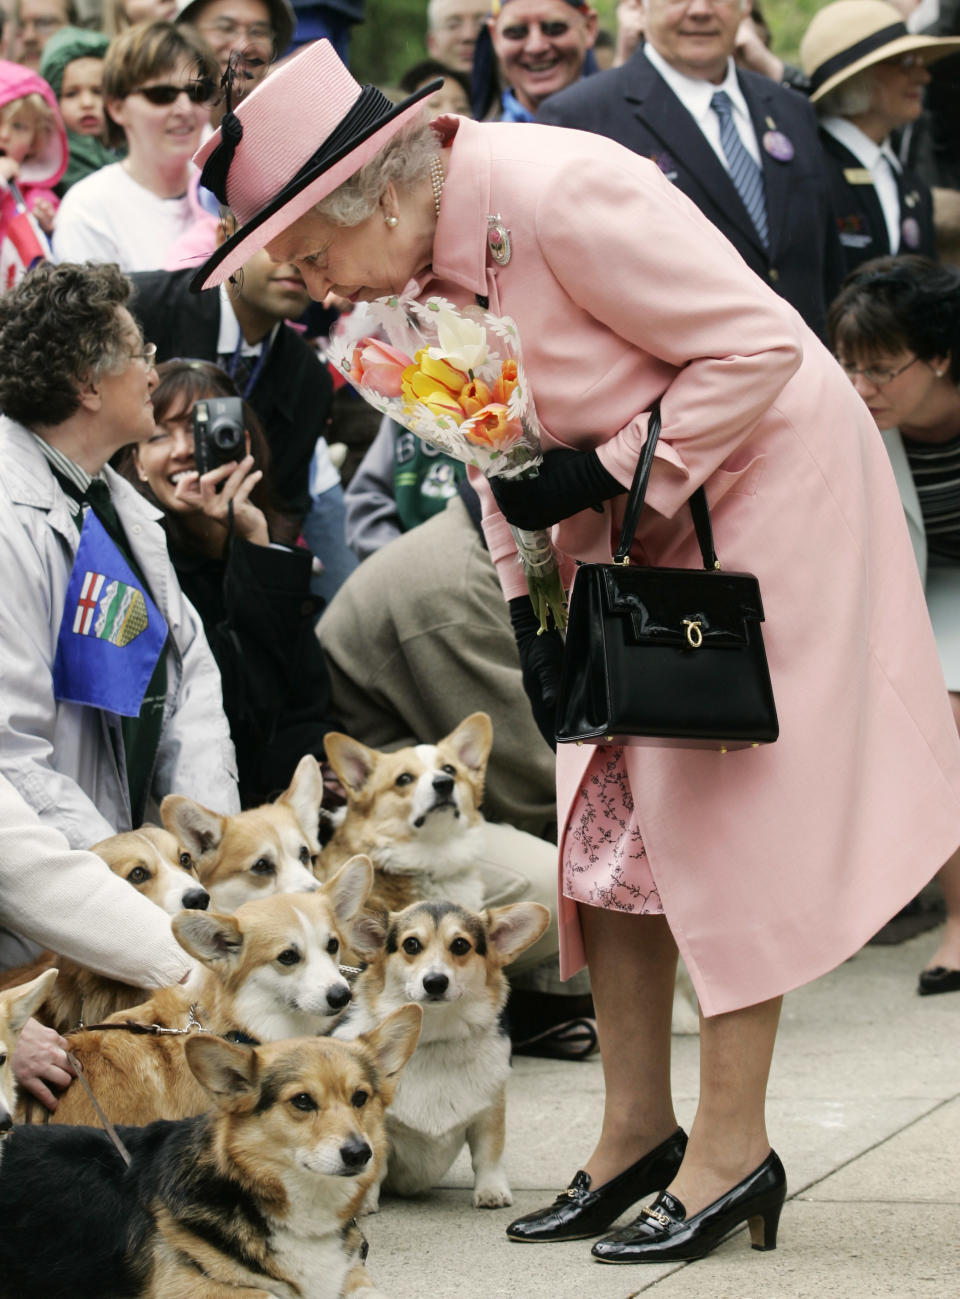 The Queen stopped to view a group of corgi dogs during her visit to Canada back in May 2005, spending several minutes talking with owners and petting the animals. (Reuters)